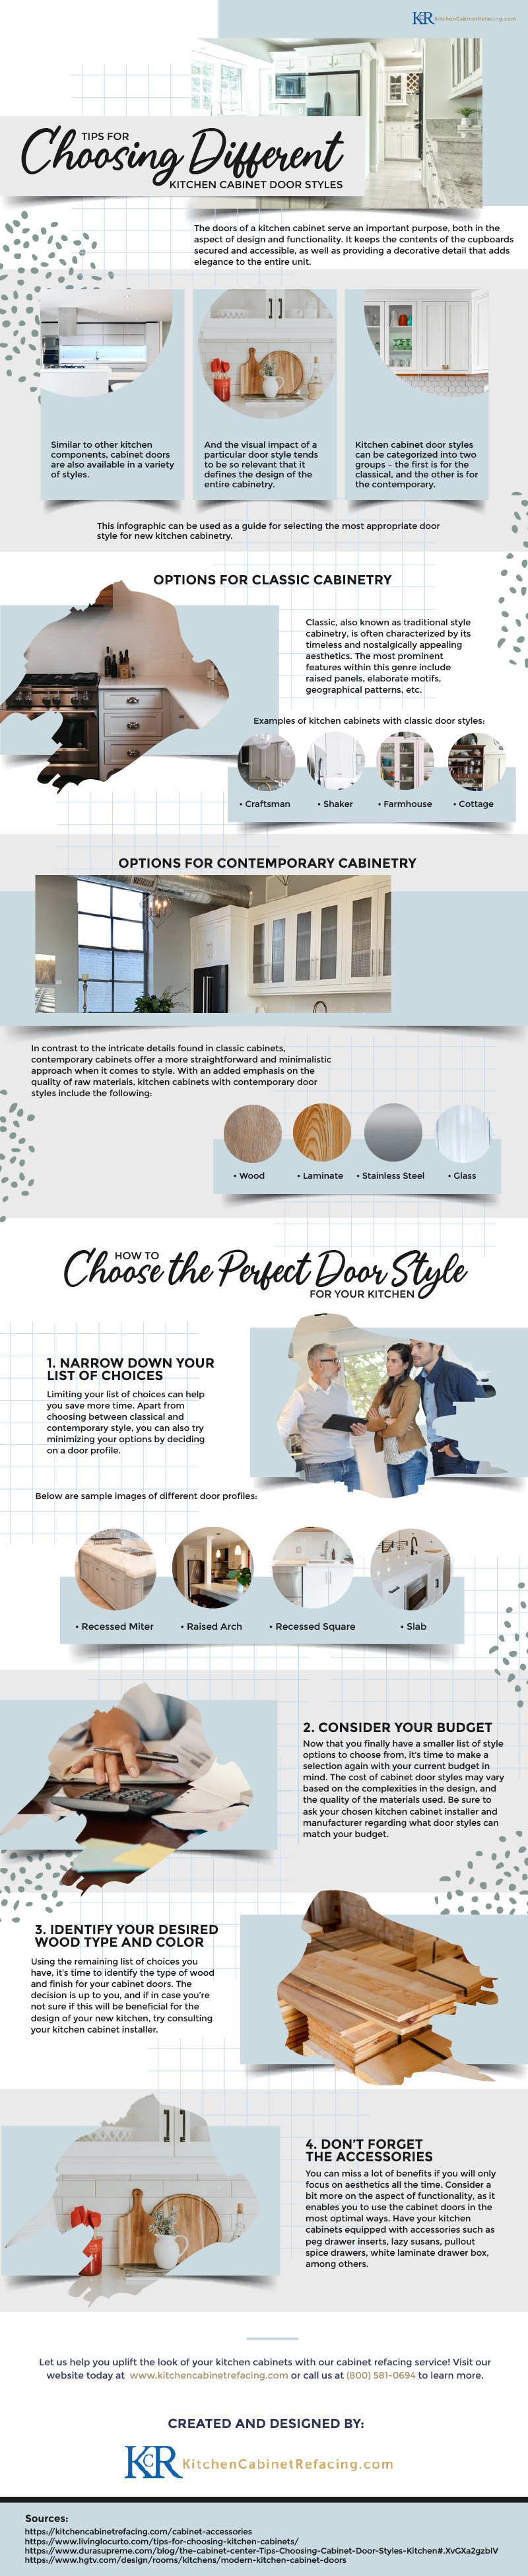 Tips_for_Choosing_Different_Kitchen_Cabinet_Door_Styles_infographic_image